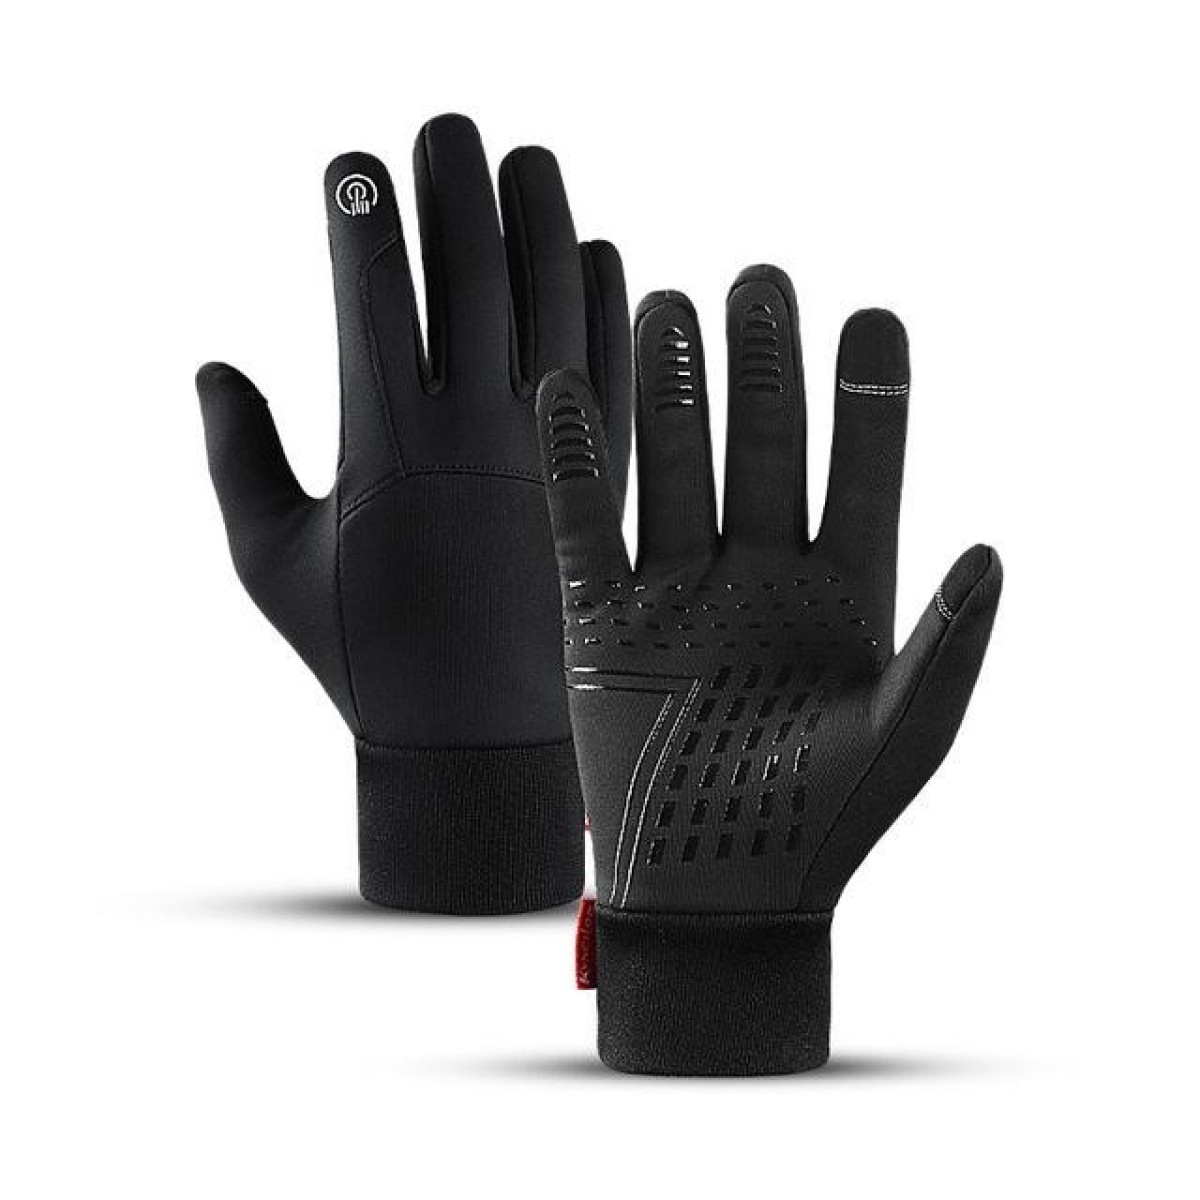 Softshell touchscreen antislip gloves CAMPO CAMPO - view 5